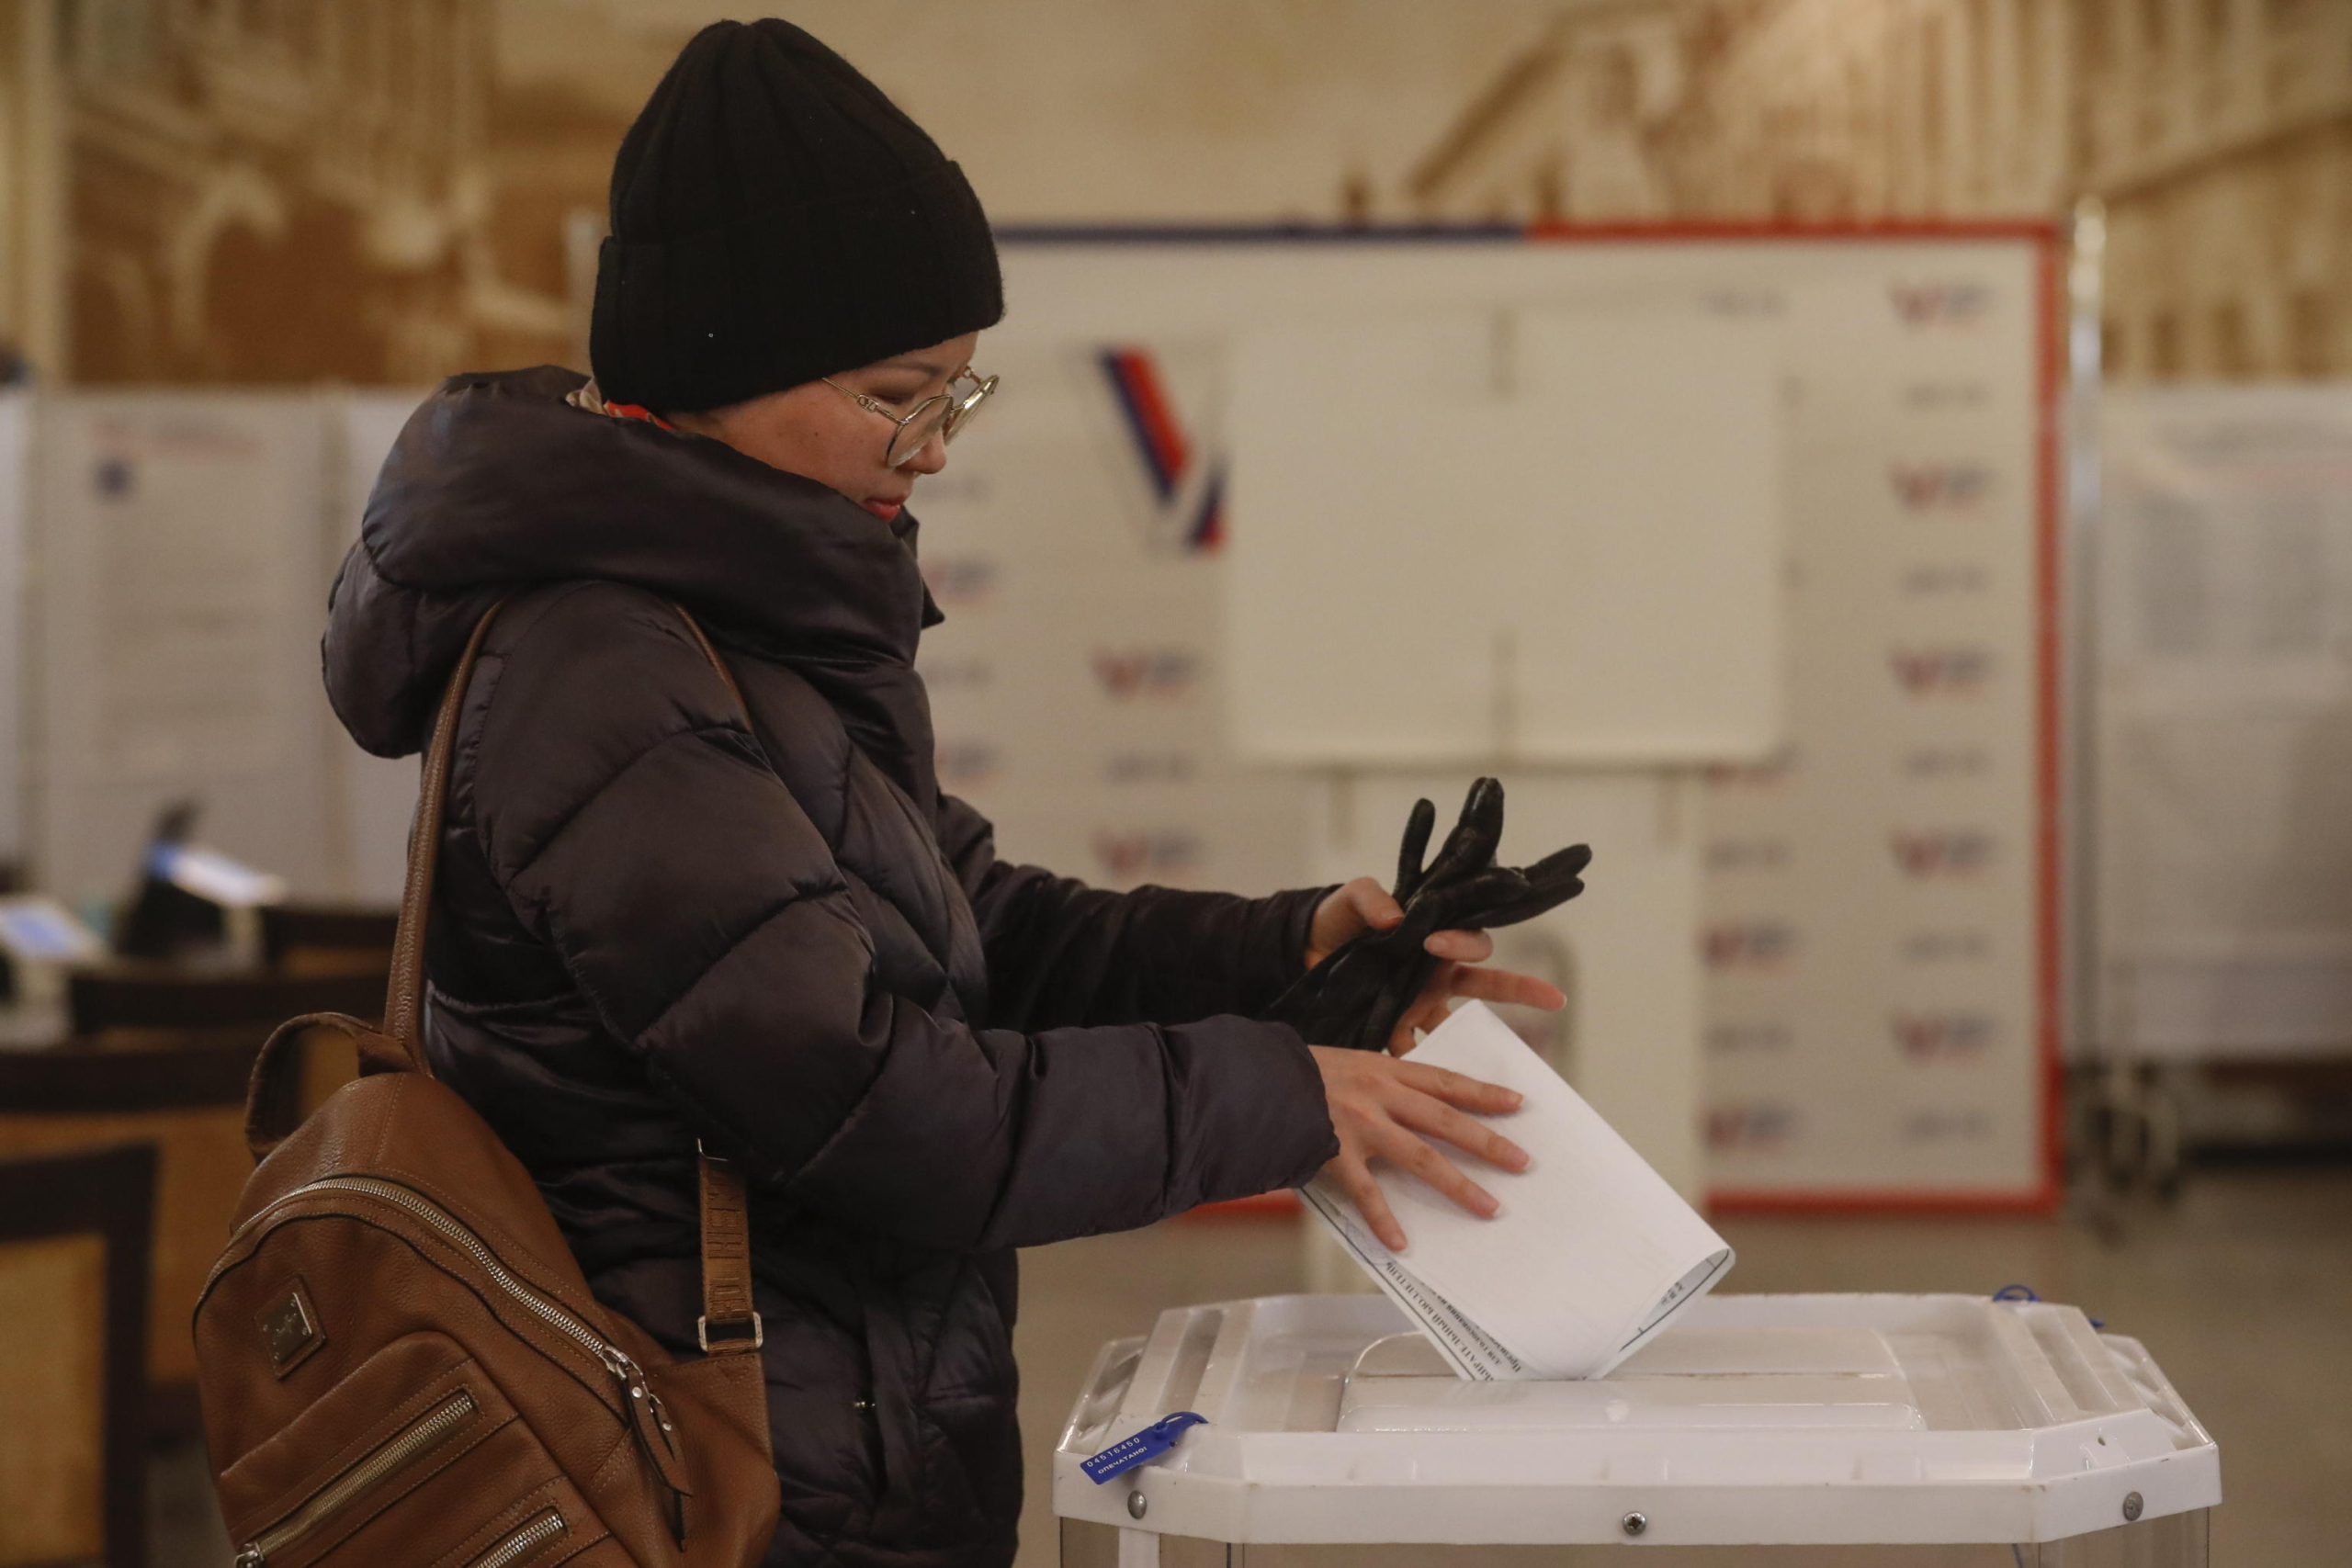 epa11221701 A Russian woman casts her ballot during presidential elections in Moscow, Russia, 15 March 2024. The Federation Council has scheduled presidential elections for 17 March 2024. Voting will last three days, from 15 to 17 March. Four candidates registered by the Central Election Commission of the Russian Federation are vying for the post of head of state: Leonid Slutsky, Nikolai Kharitonov, Vladislav Davankov, and Vladimir Putin.  EPA/MAXIM SHIPENKOV